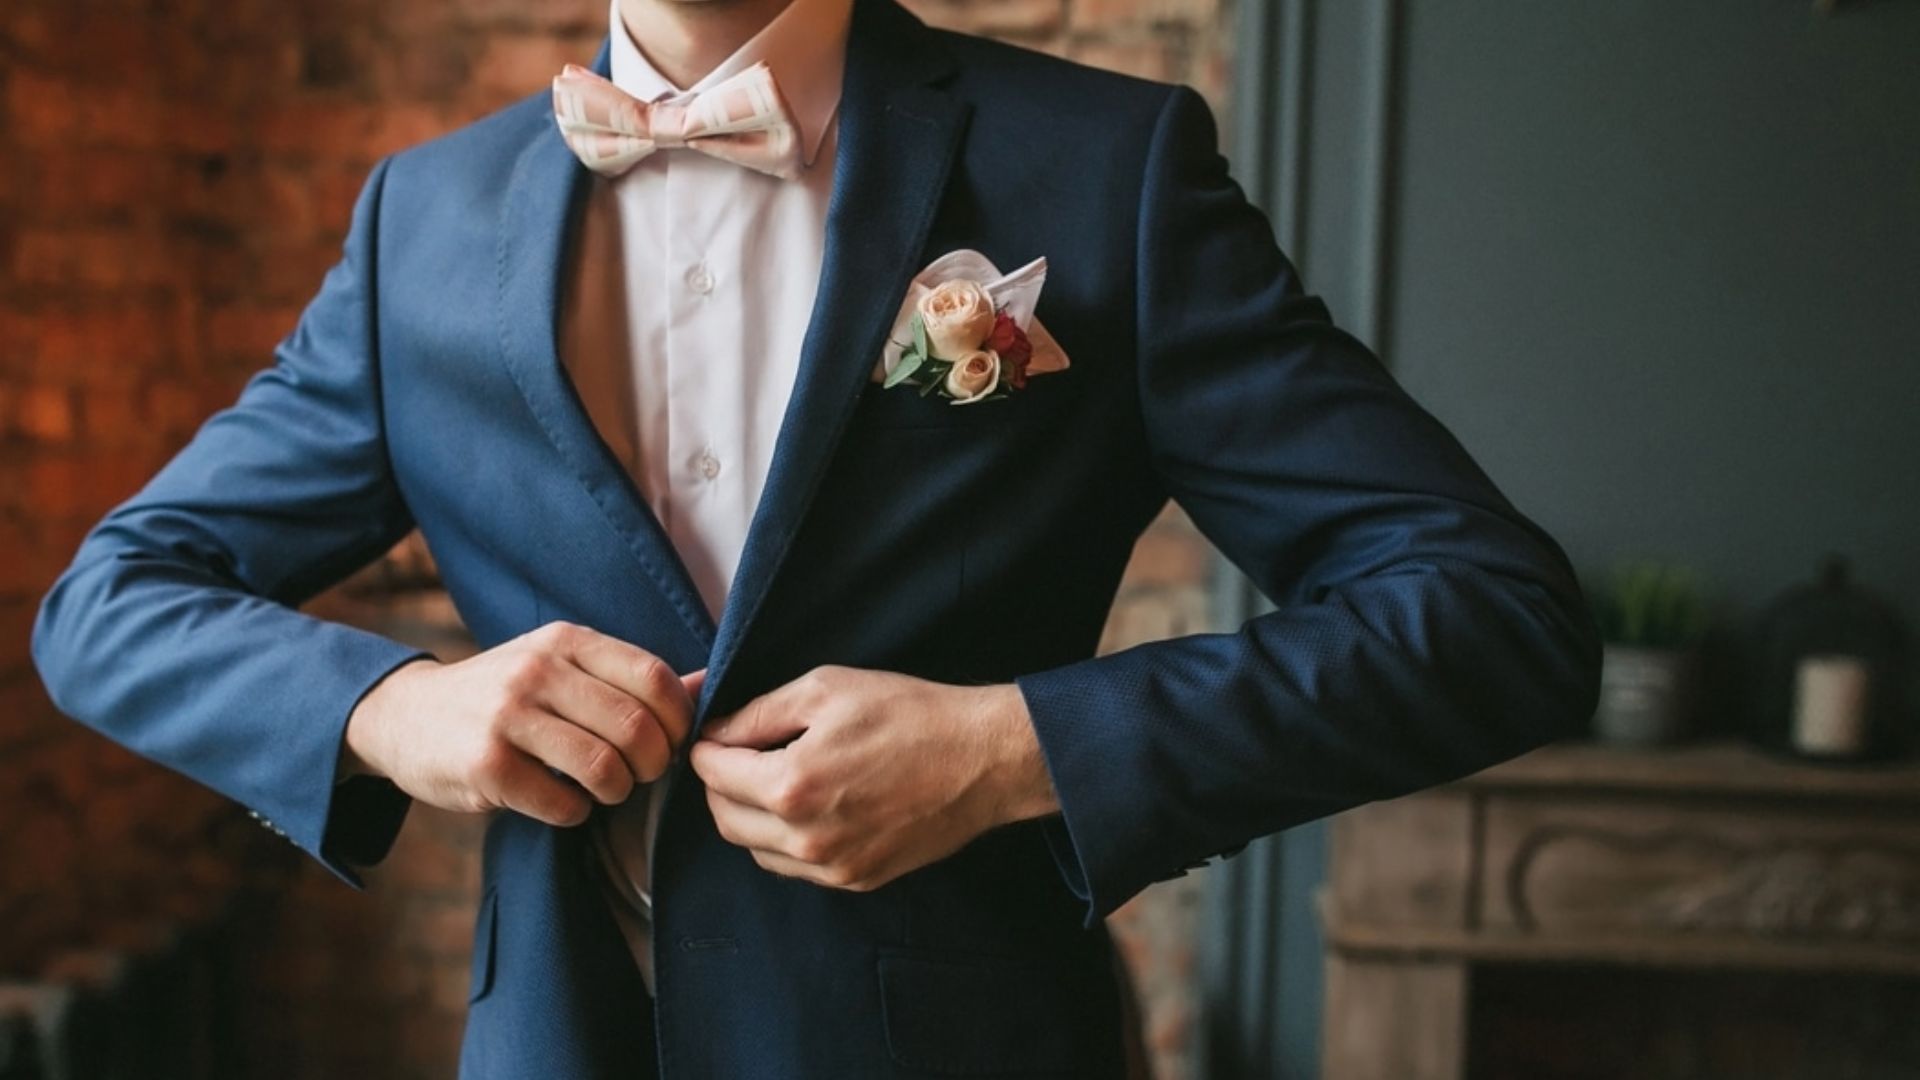 Your Ultimate Guide to Men's Wedding Suit Styles